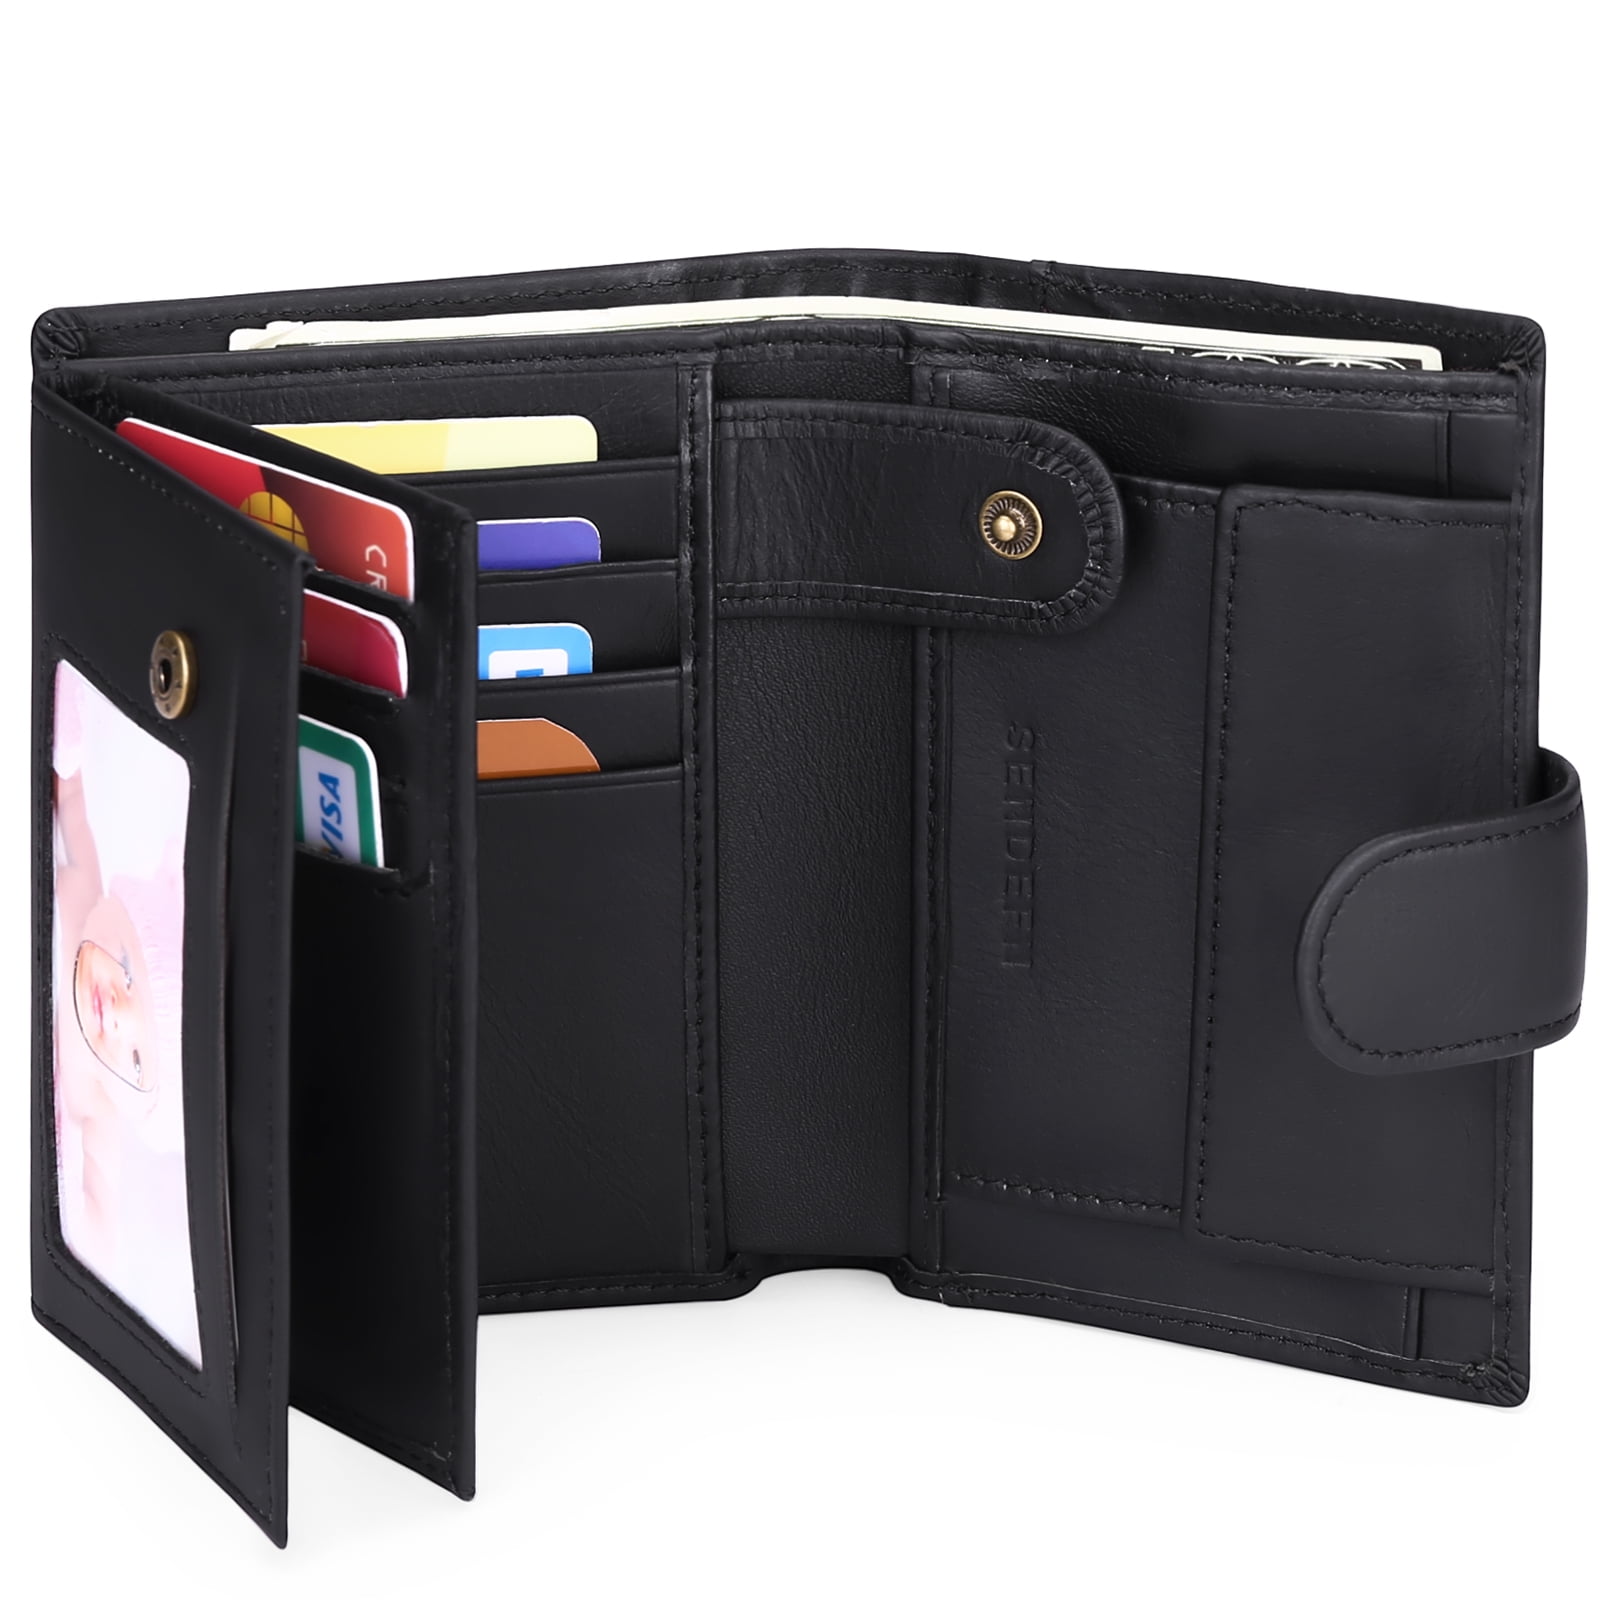 Buy Leatherite Secure Wallet Online at Best Price in India on Naaptol.com